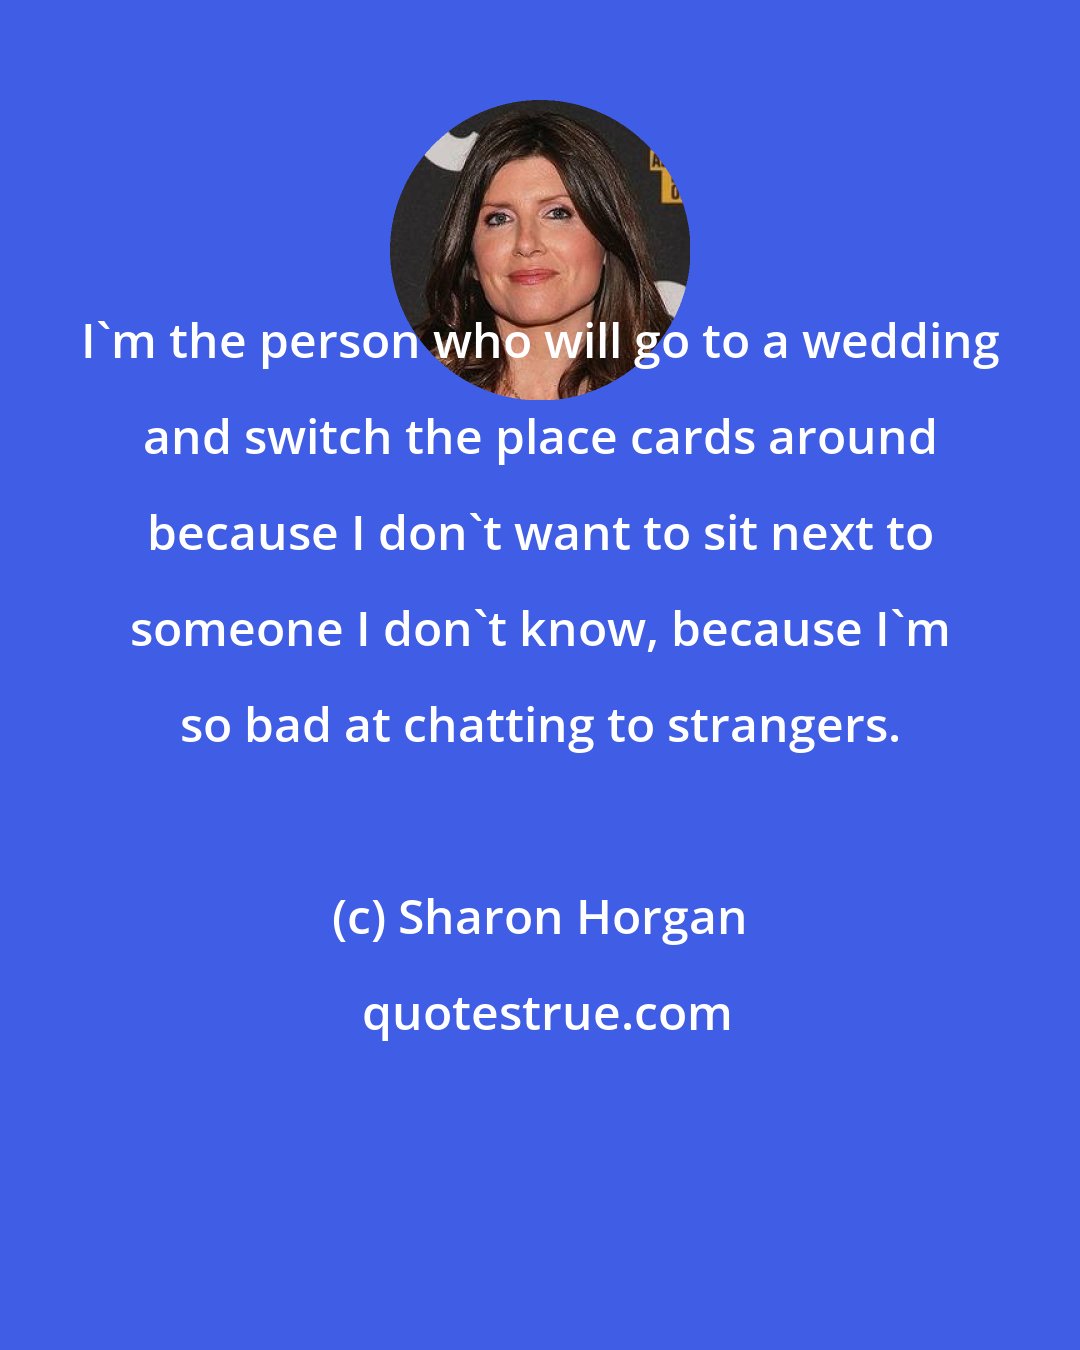 Sharon Horgan: I'm the person who will go to a wedding and switch the place cards around because I don't want to sit next to someone I don't know, because I'm so bad at chatting to strangers.